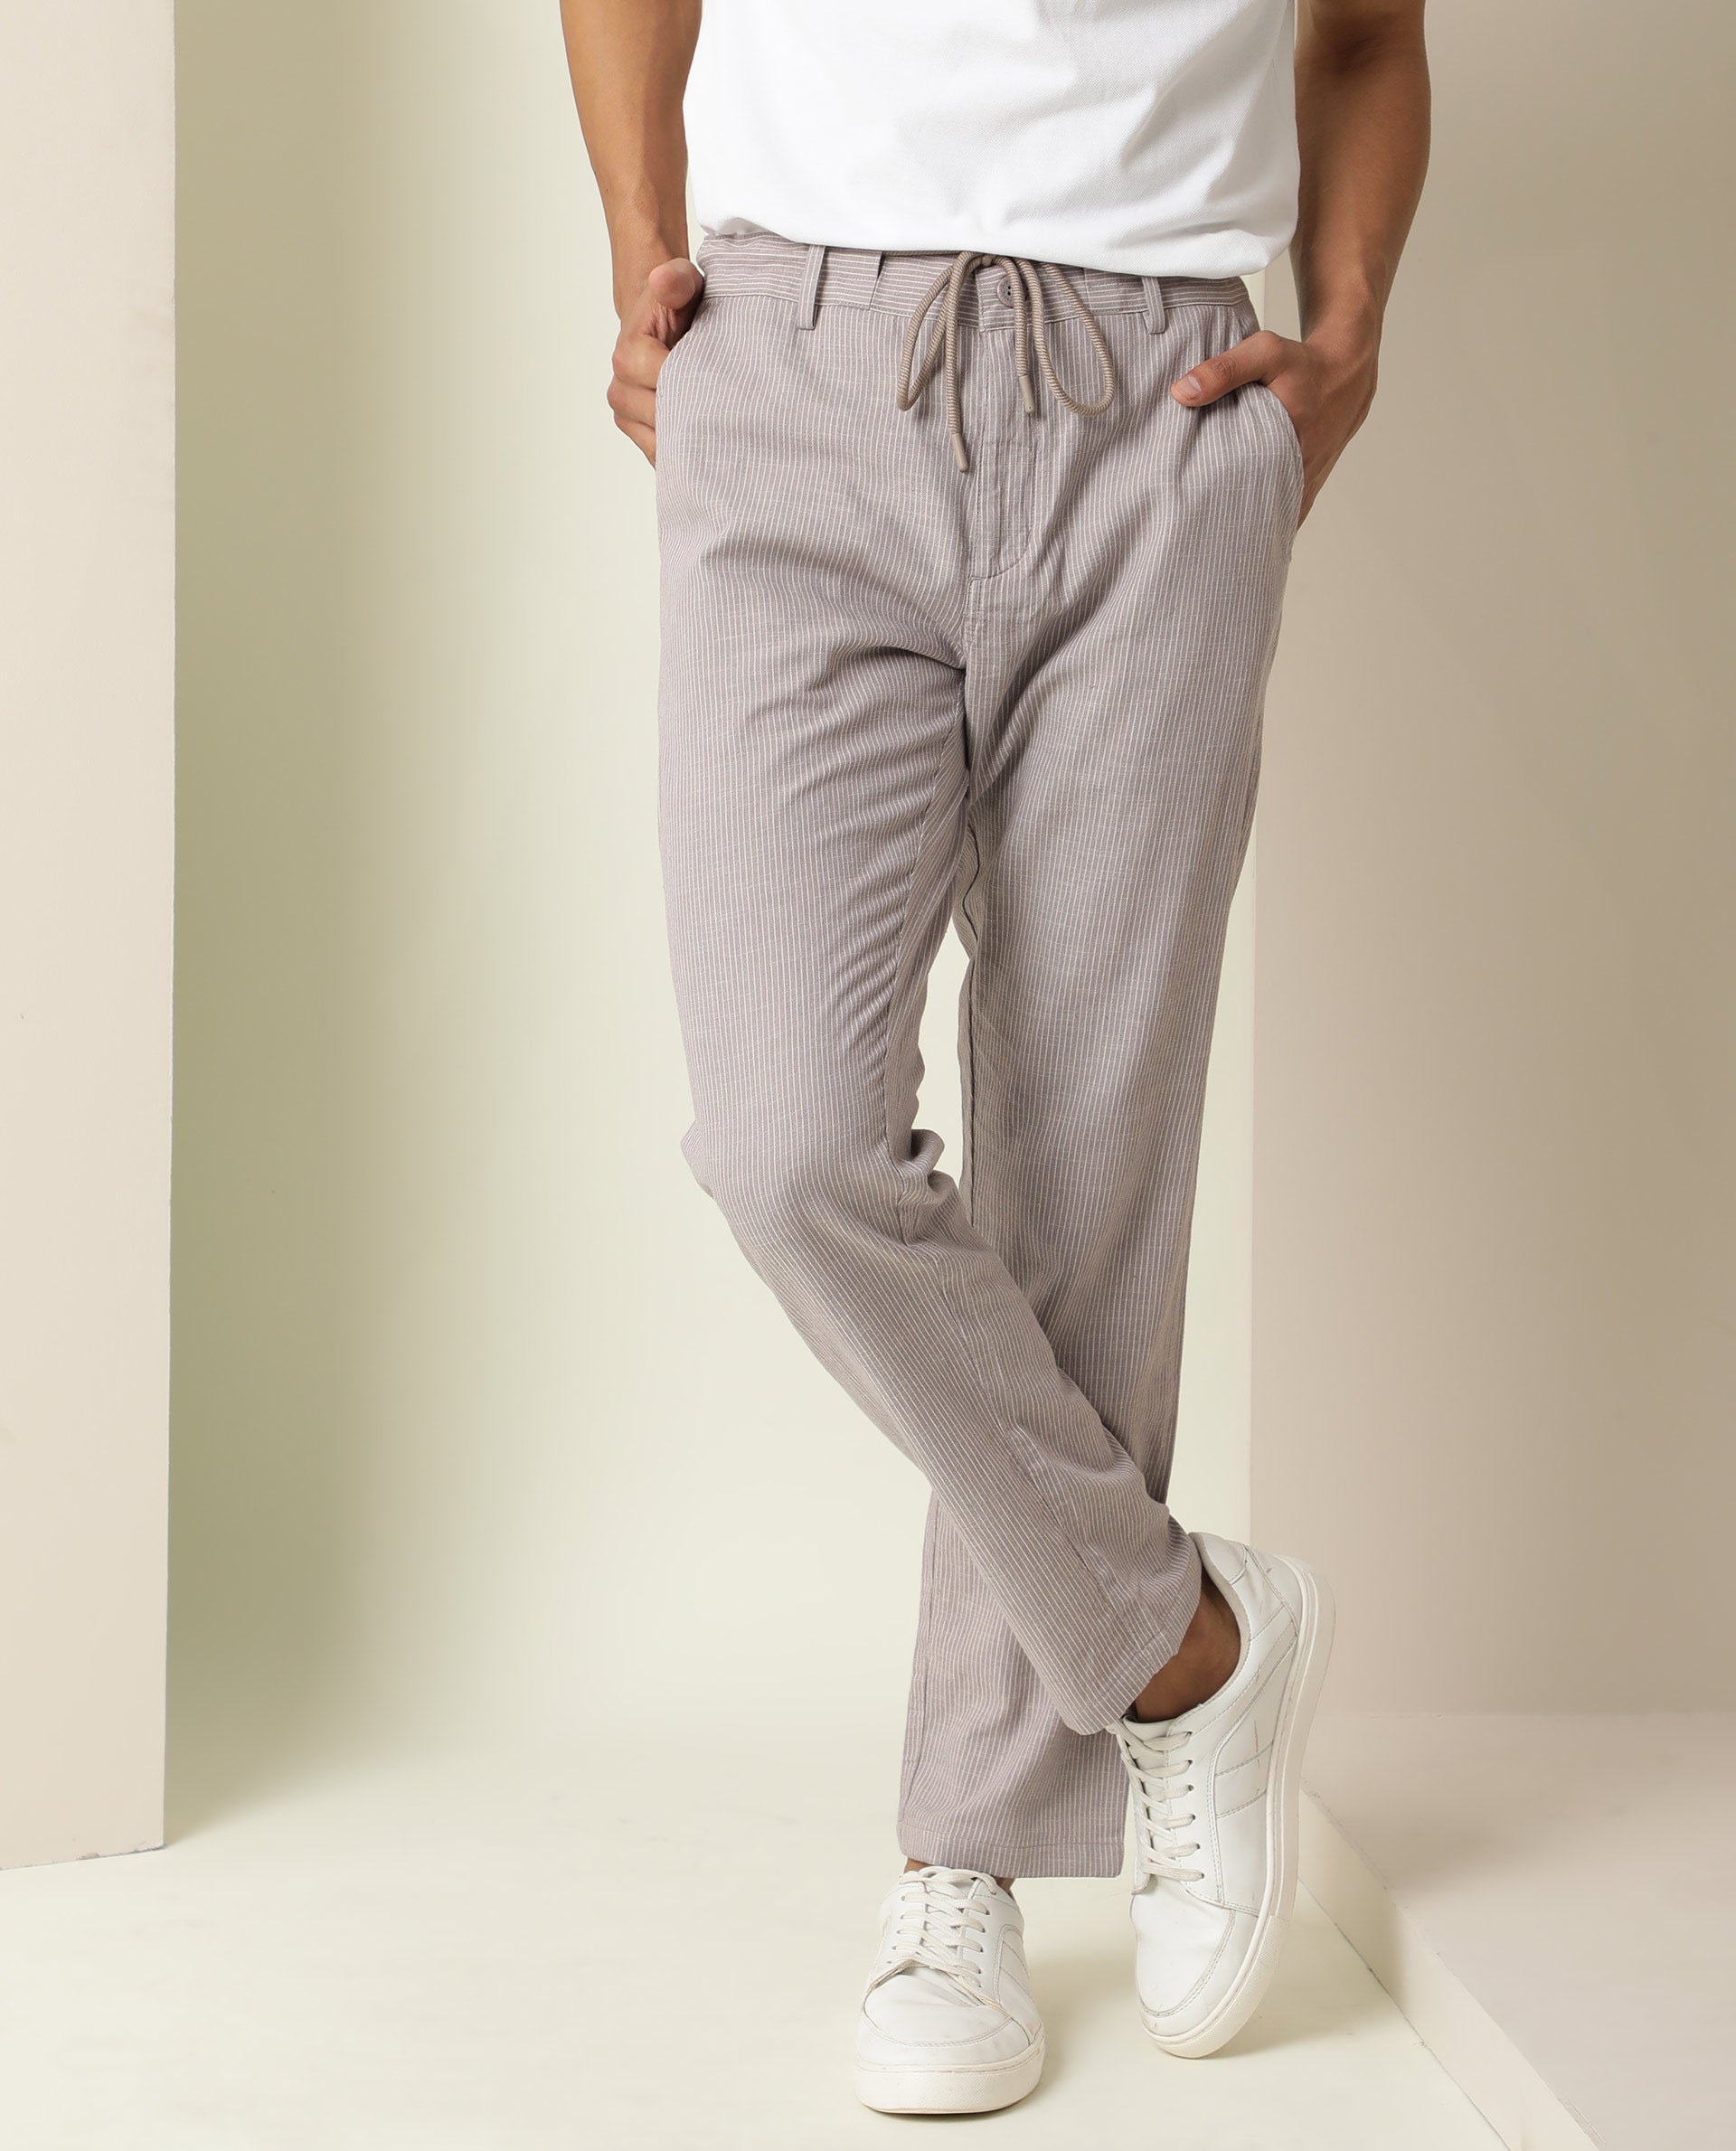 Mens Drawstring Trousers. Available in Airforce Blue and Stone.